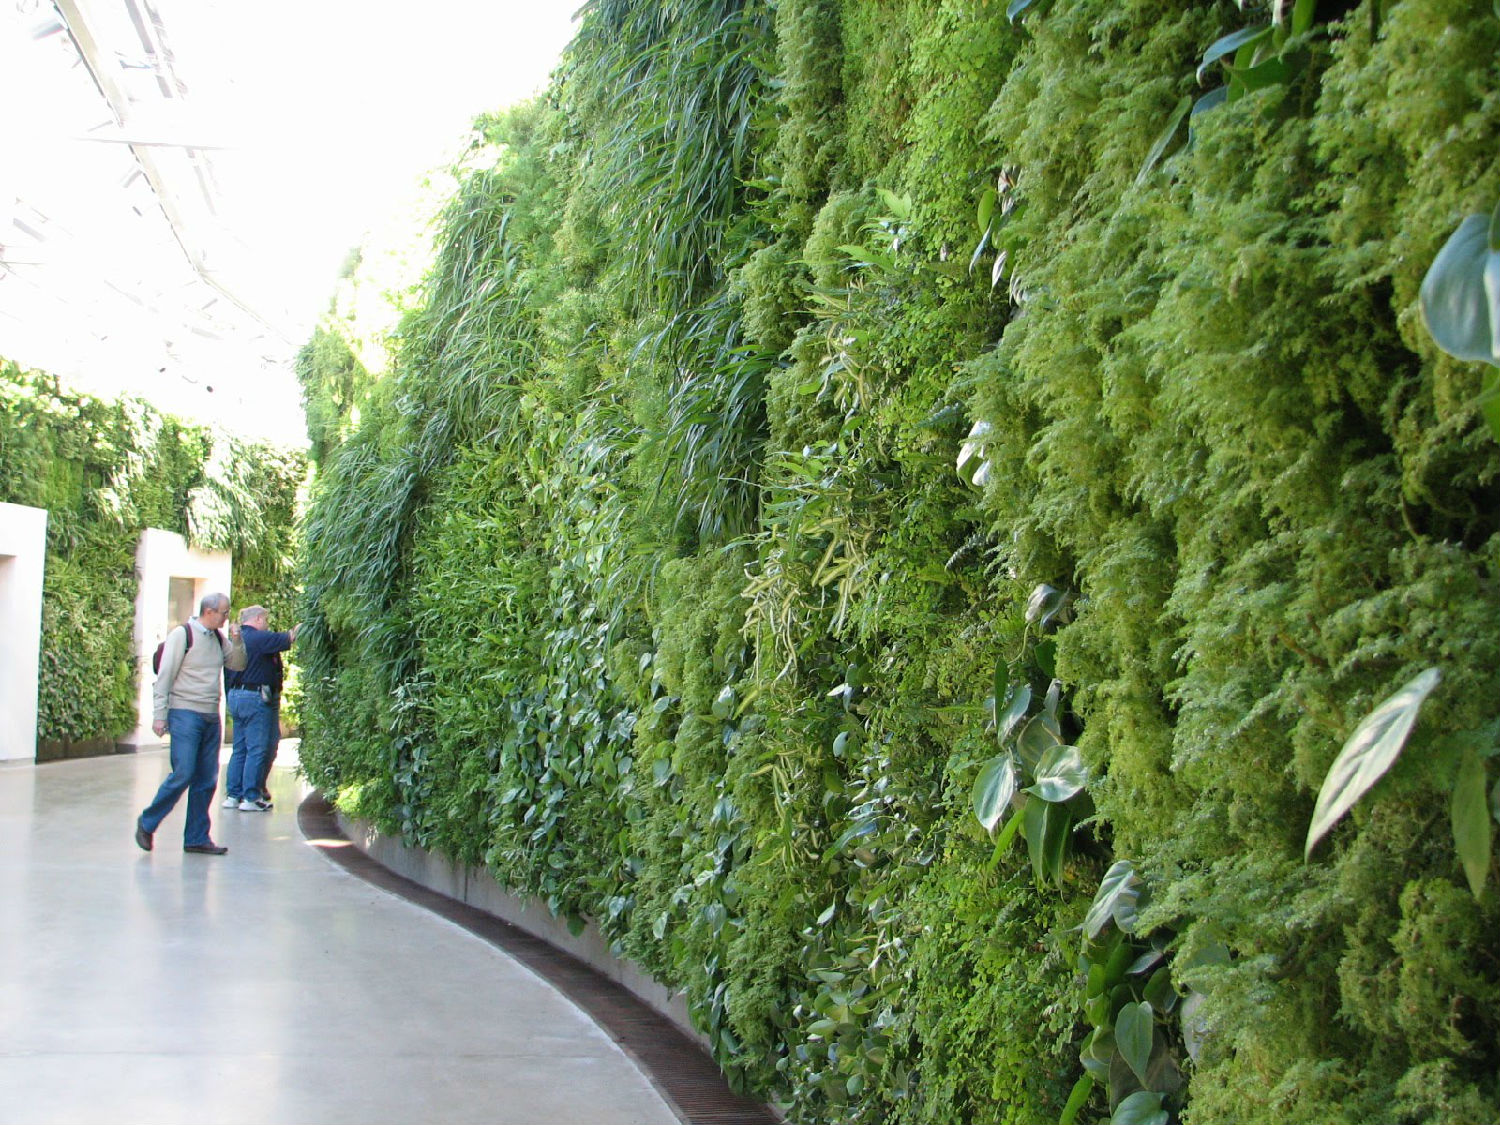 garden-outstanding-longwood-living-wall-design-feat-double-side-wall-full-of-plants-with-glossy-floor-ideas-for-on-awesome-green-wall-for-natural-living-design-discover-fresh-and-natural-accents-using.JPG